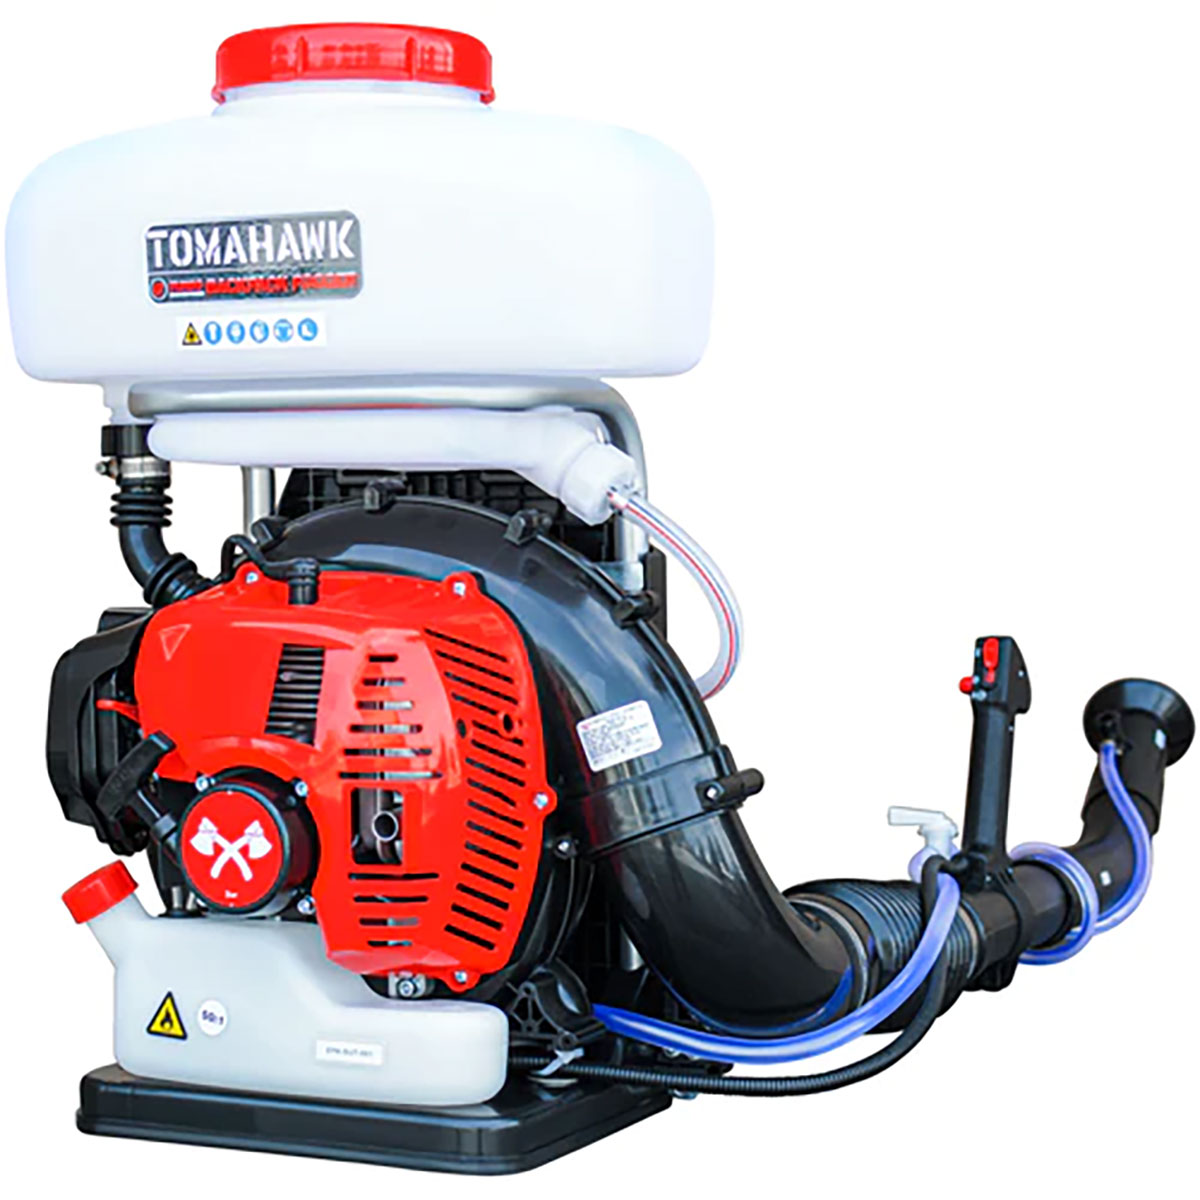 Tomahawk 3.7 Gallon Backpack Mist Blower with Turbo Boost